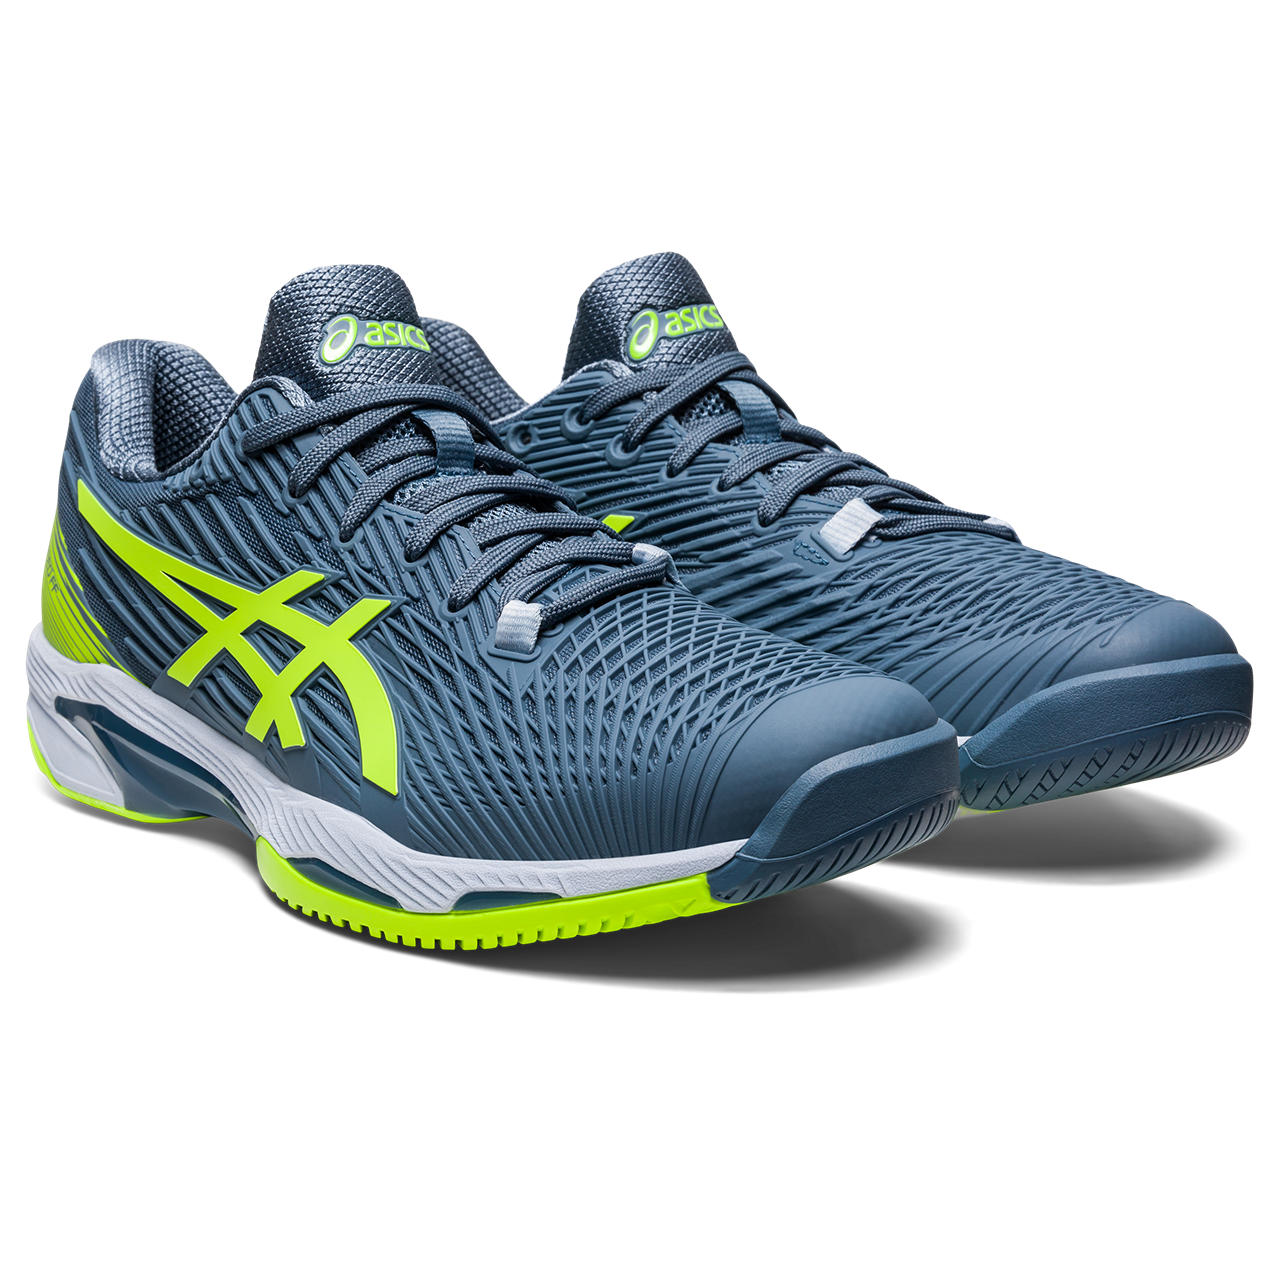 Front angle view of the Men's Solution Speed FF 2 tennis shoe by ASIC in the color Steel Blue/Hazard Green